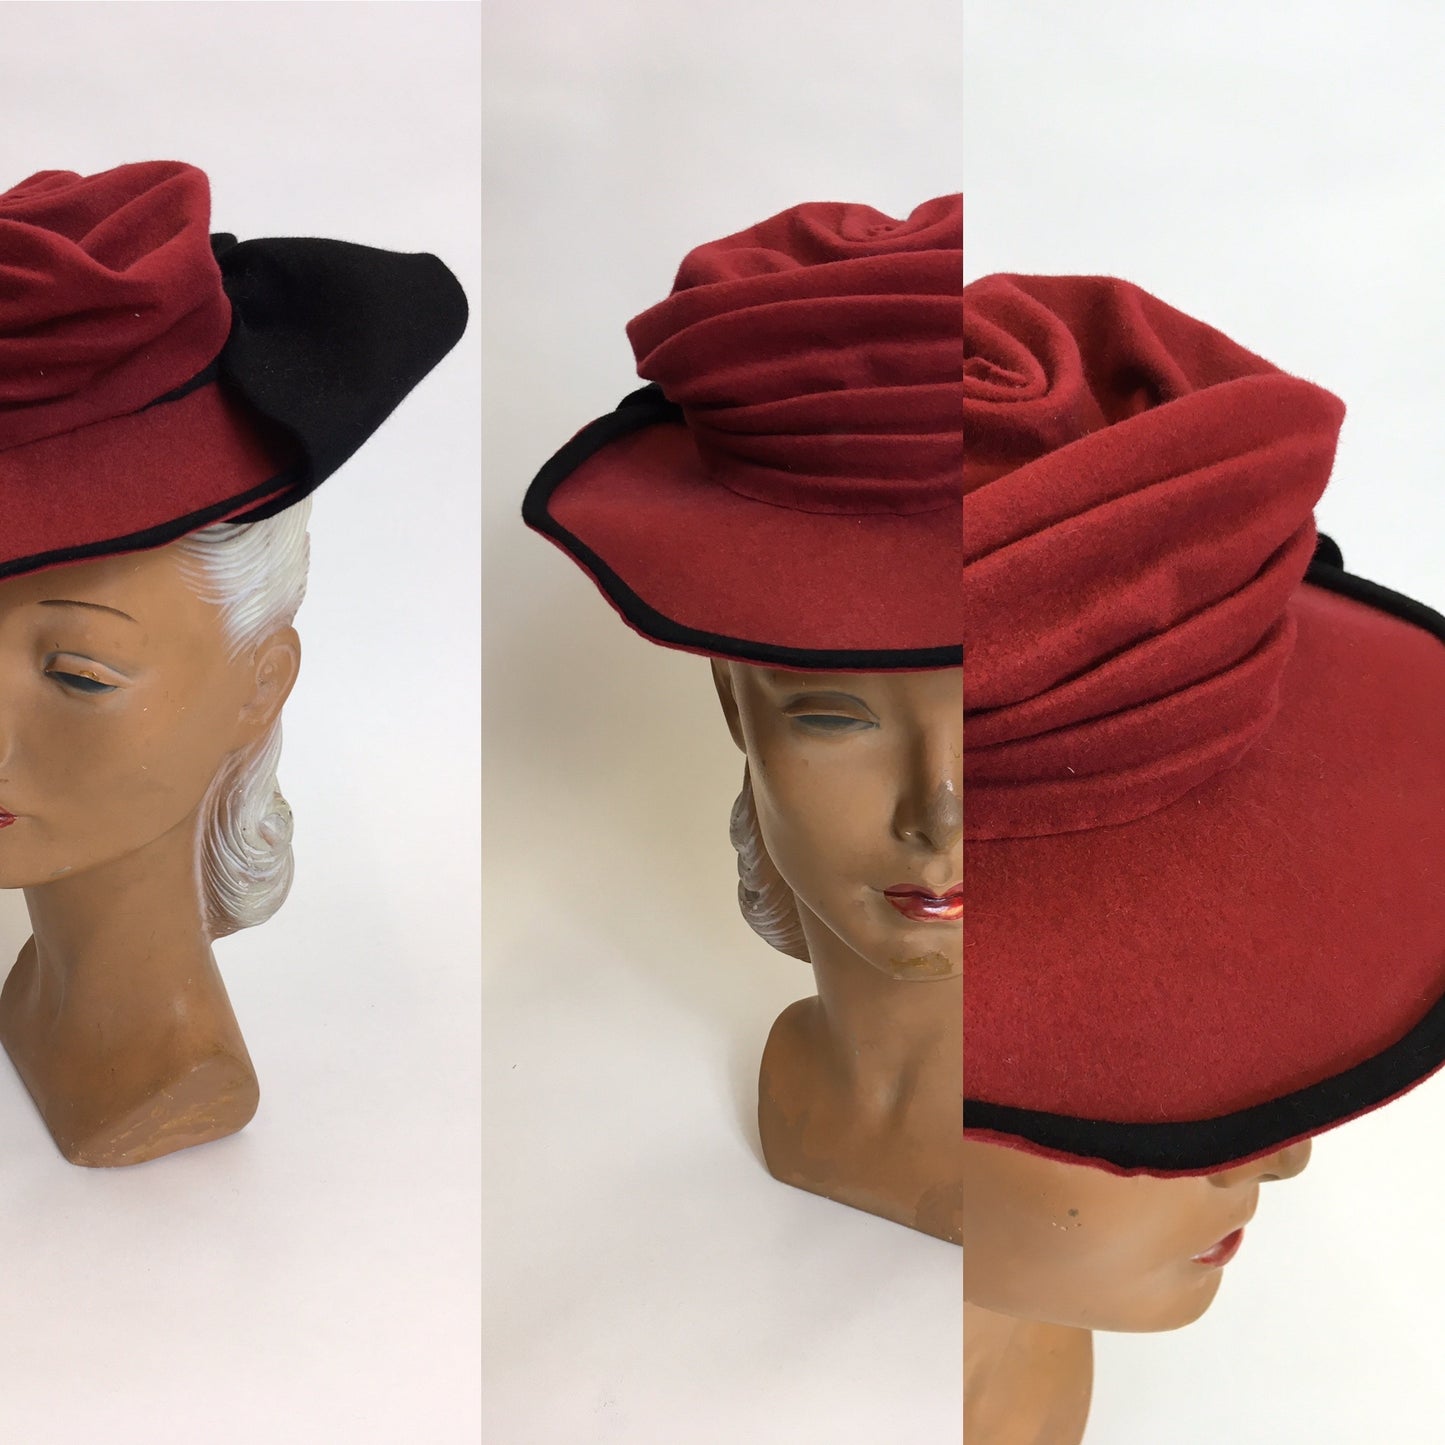 Original 1940’s Felt Topper Hat - In a Raspberry Red with Black Detailing